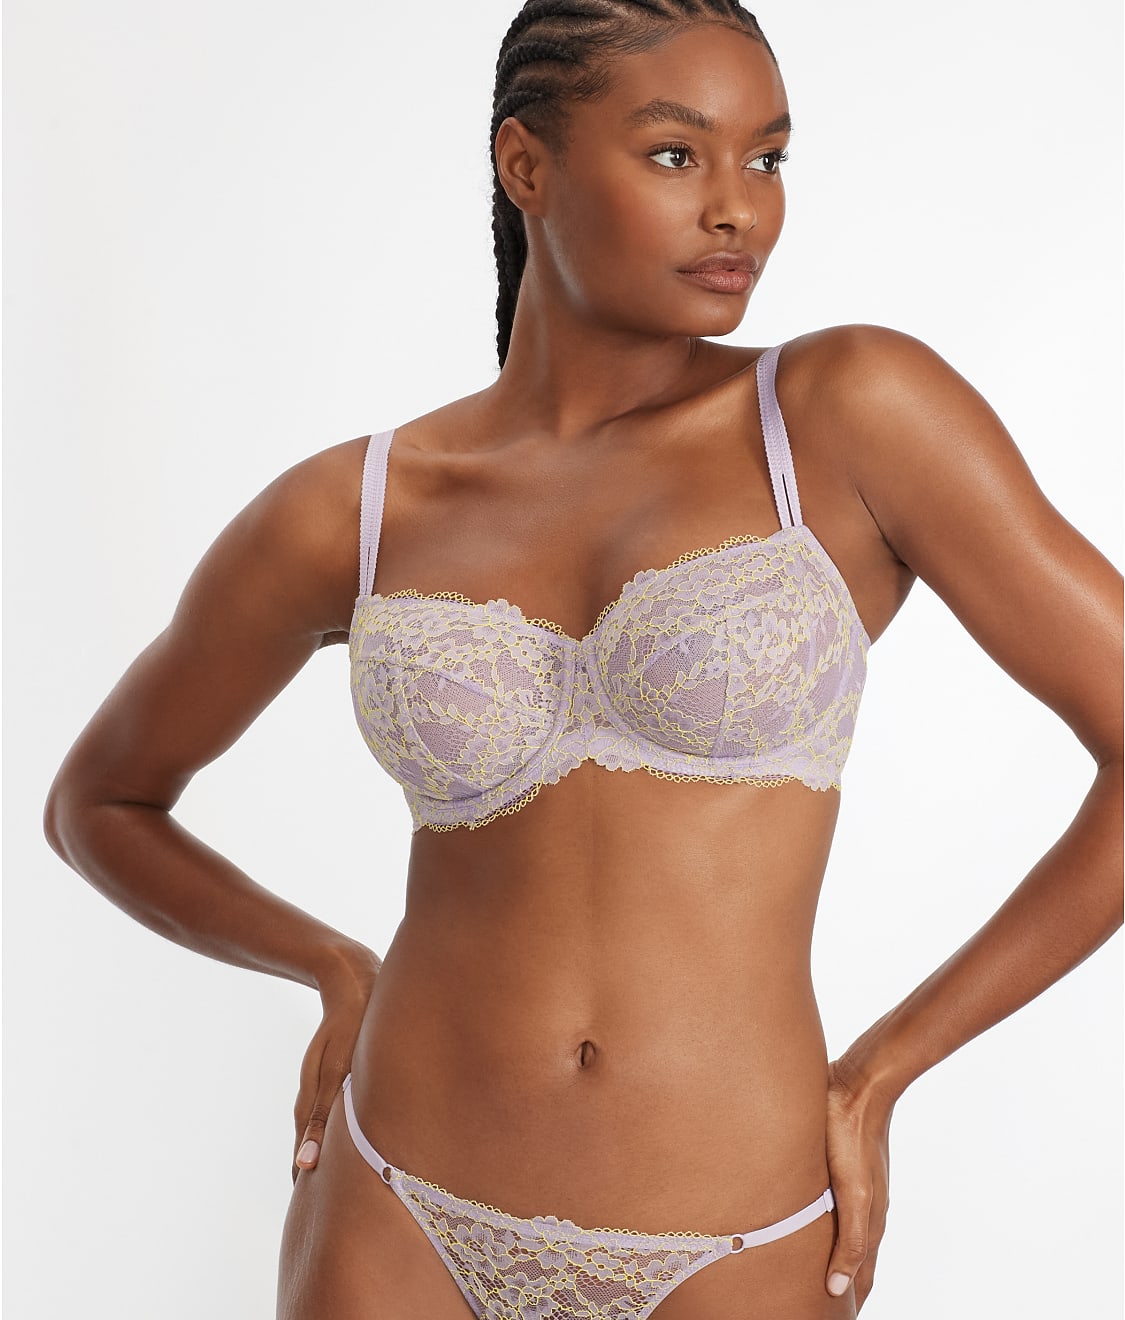 Lace Unlined Side Support Bra